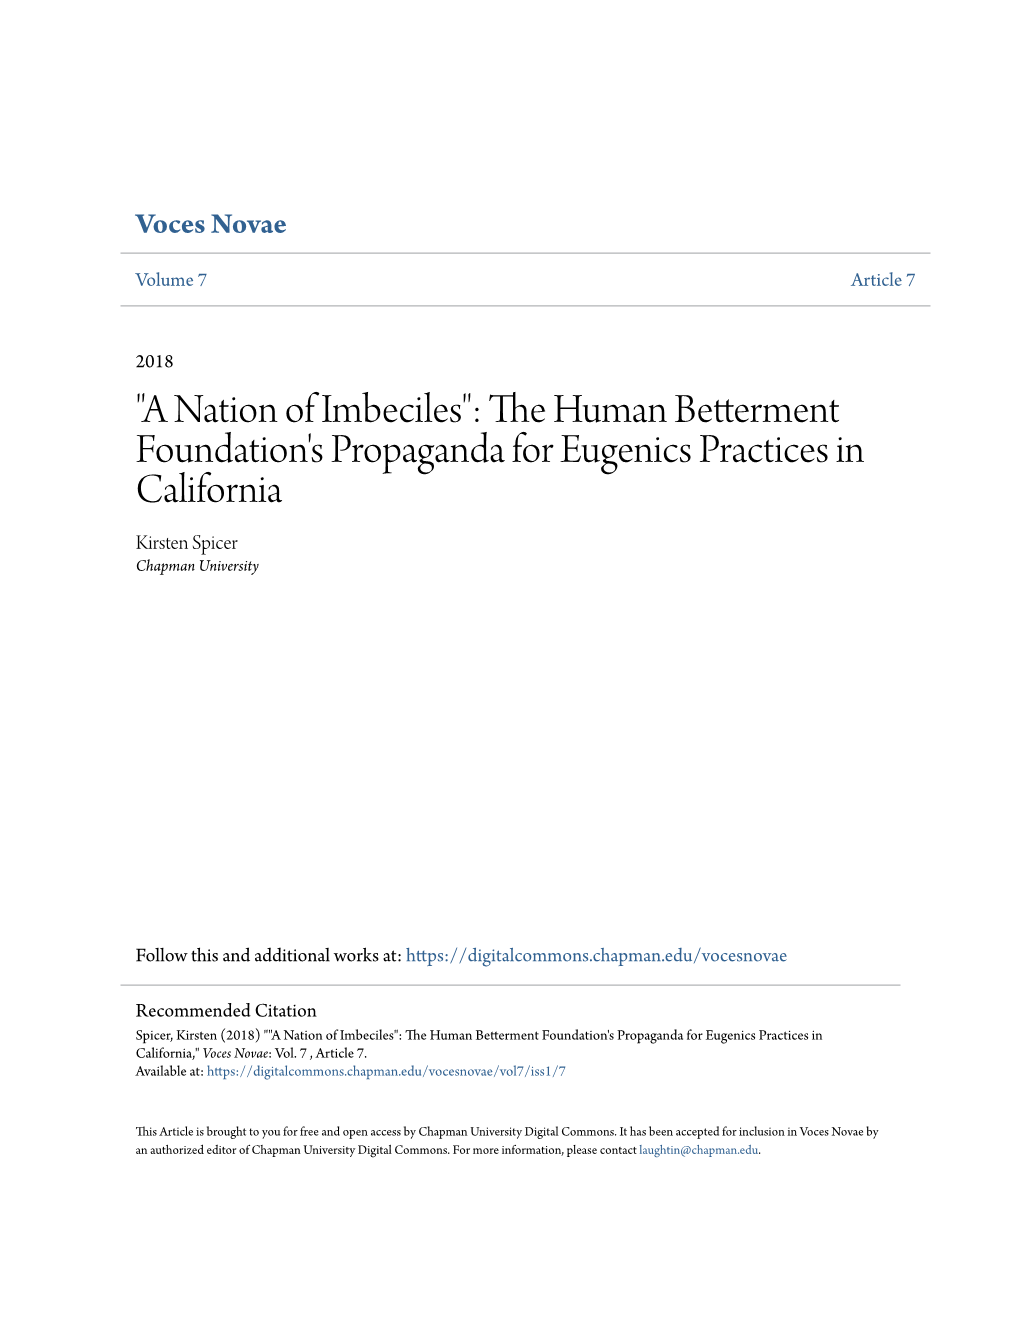 The Human Betterment Foundation's Propaganda for Eugenics Practices